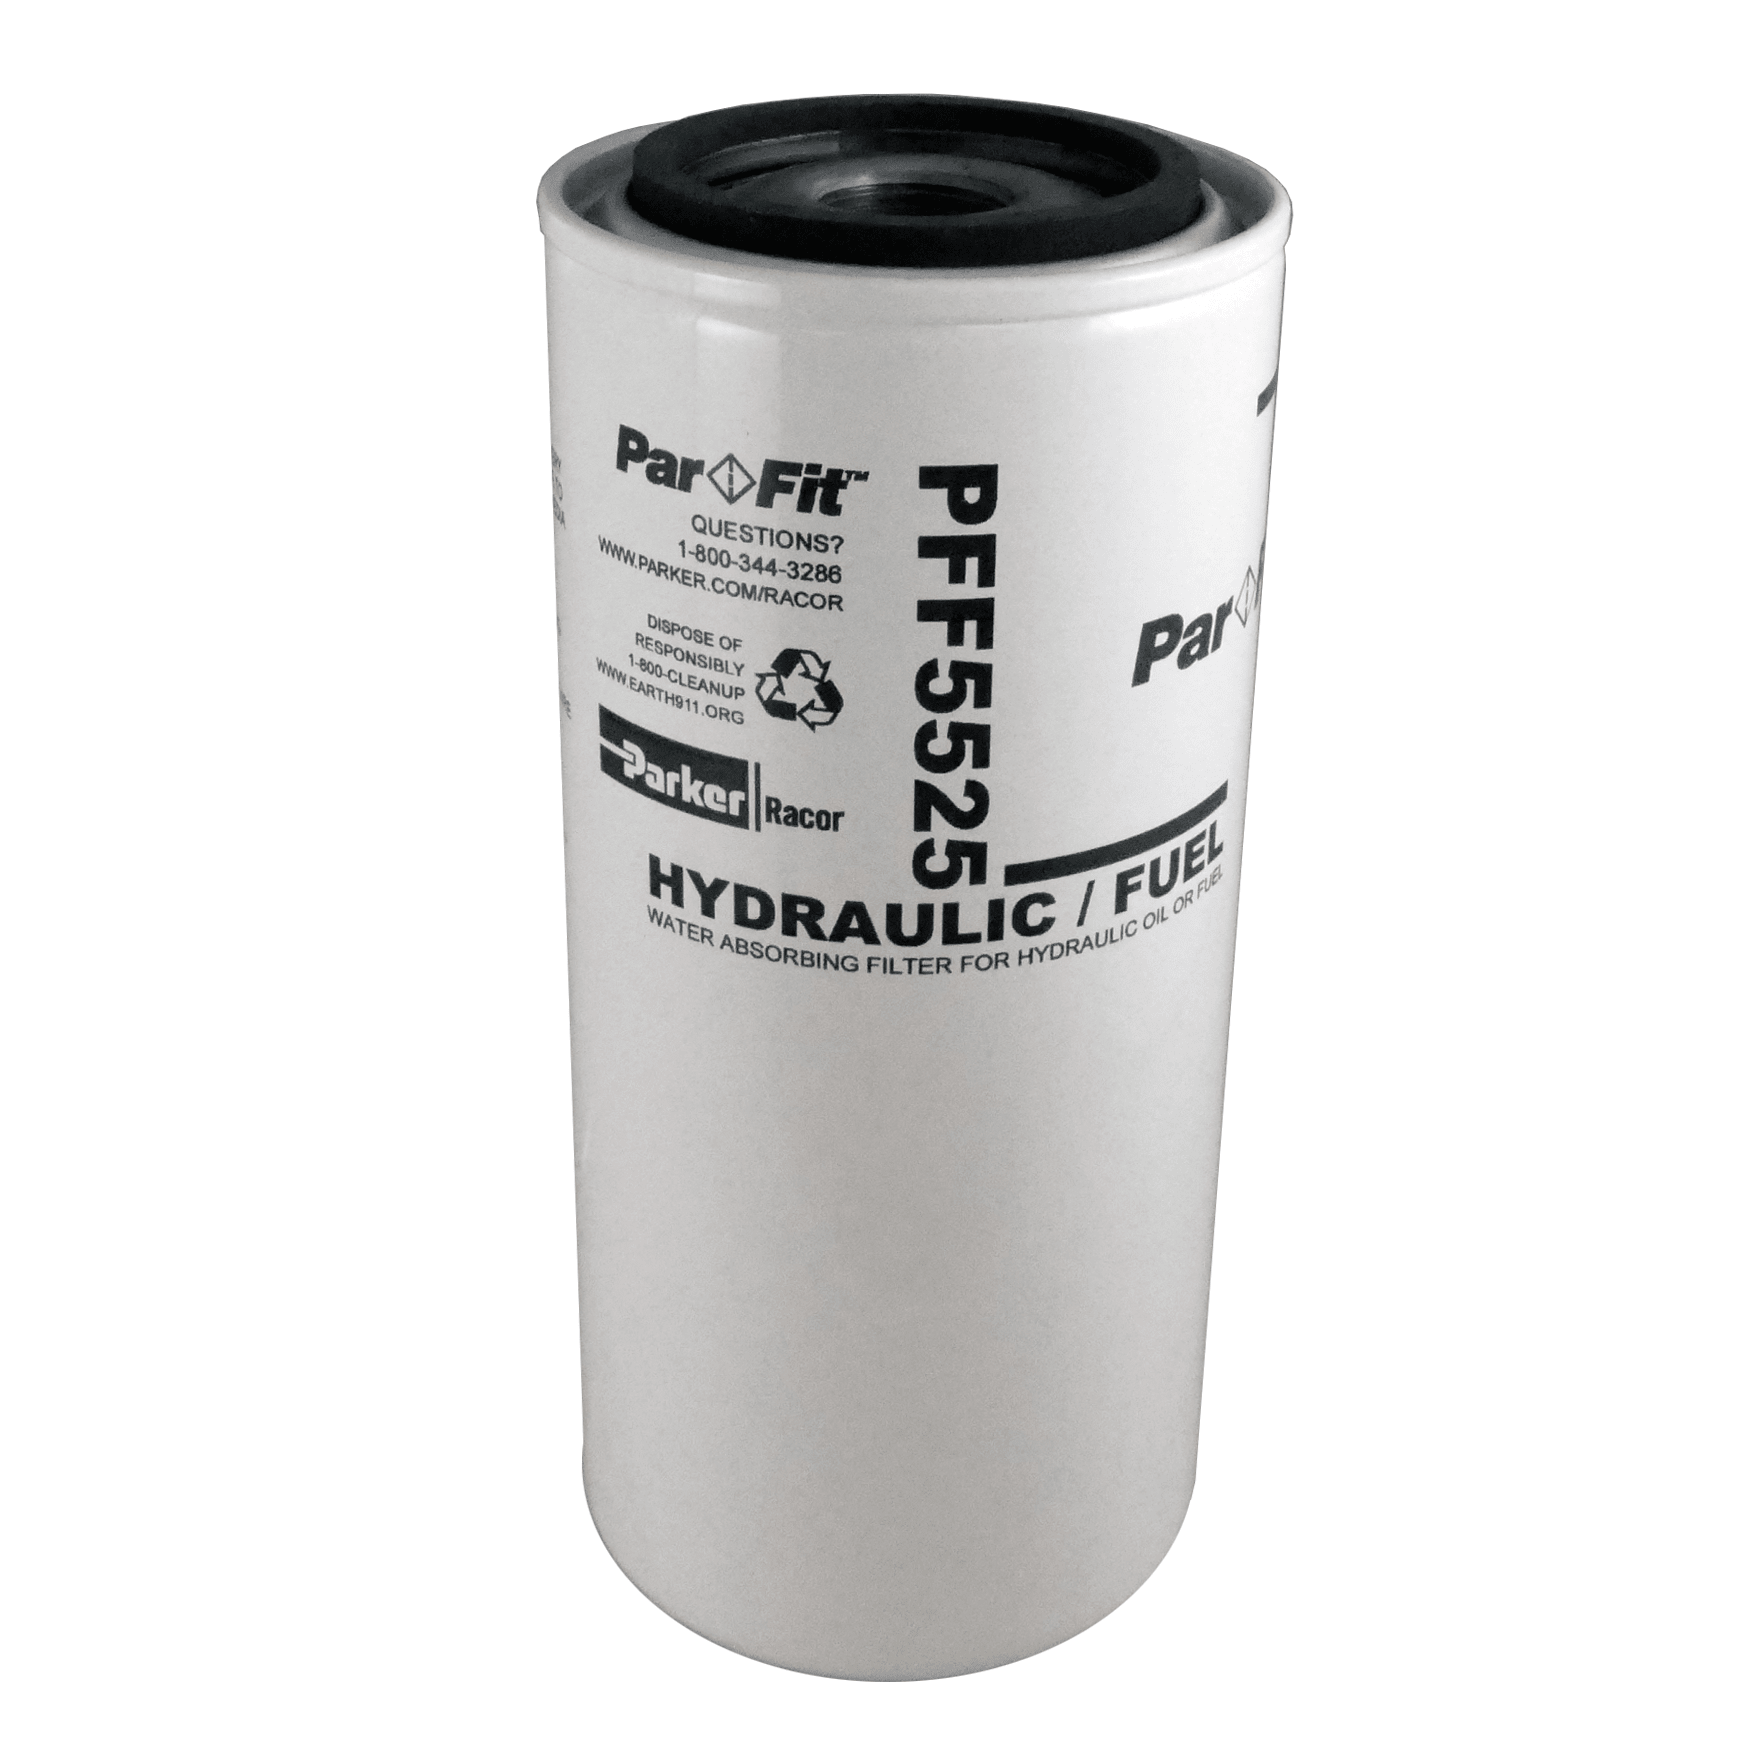 pf-f5525 of Racor Hydraulic Spin on Filter